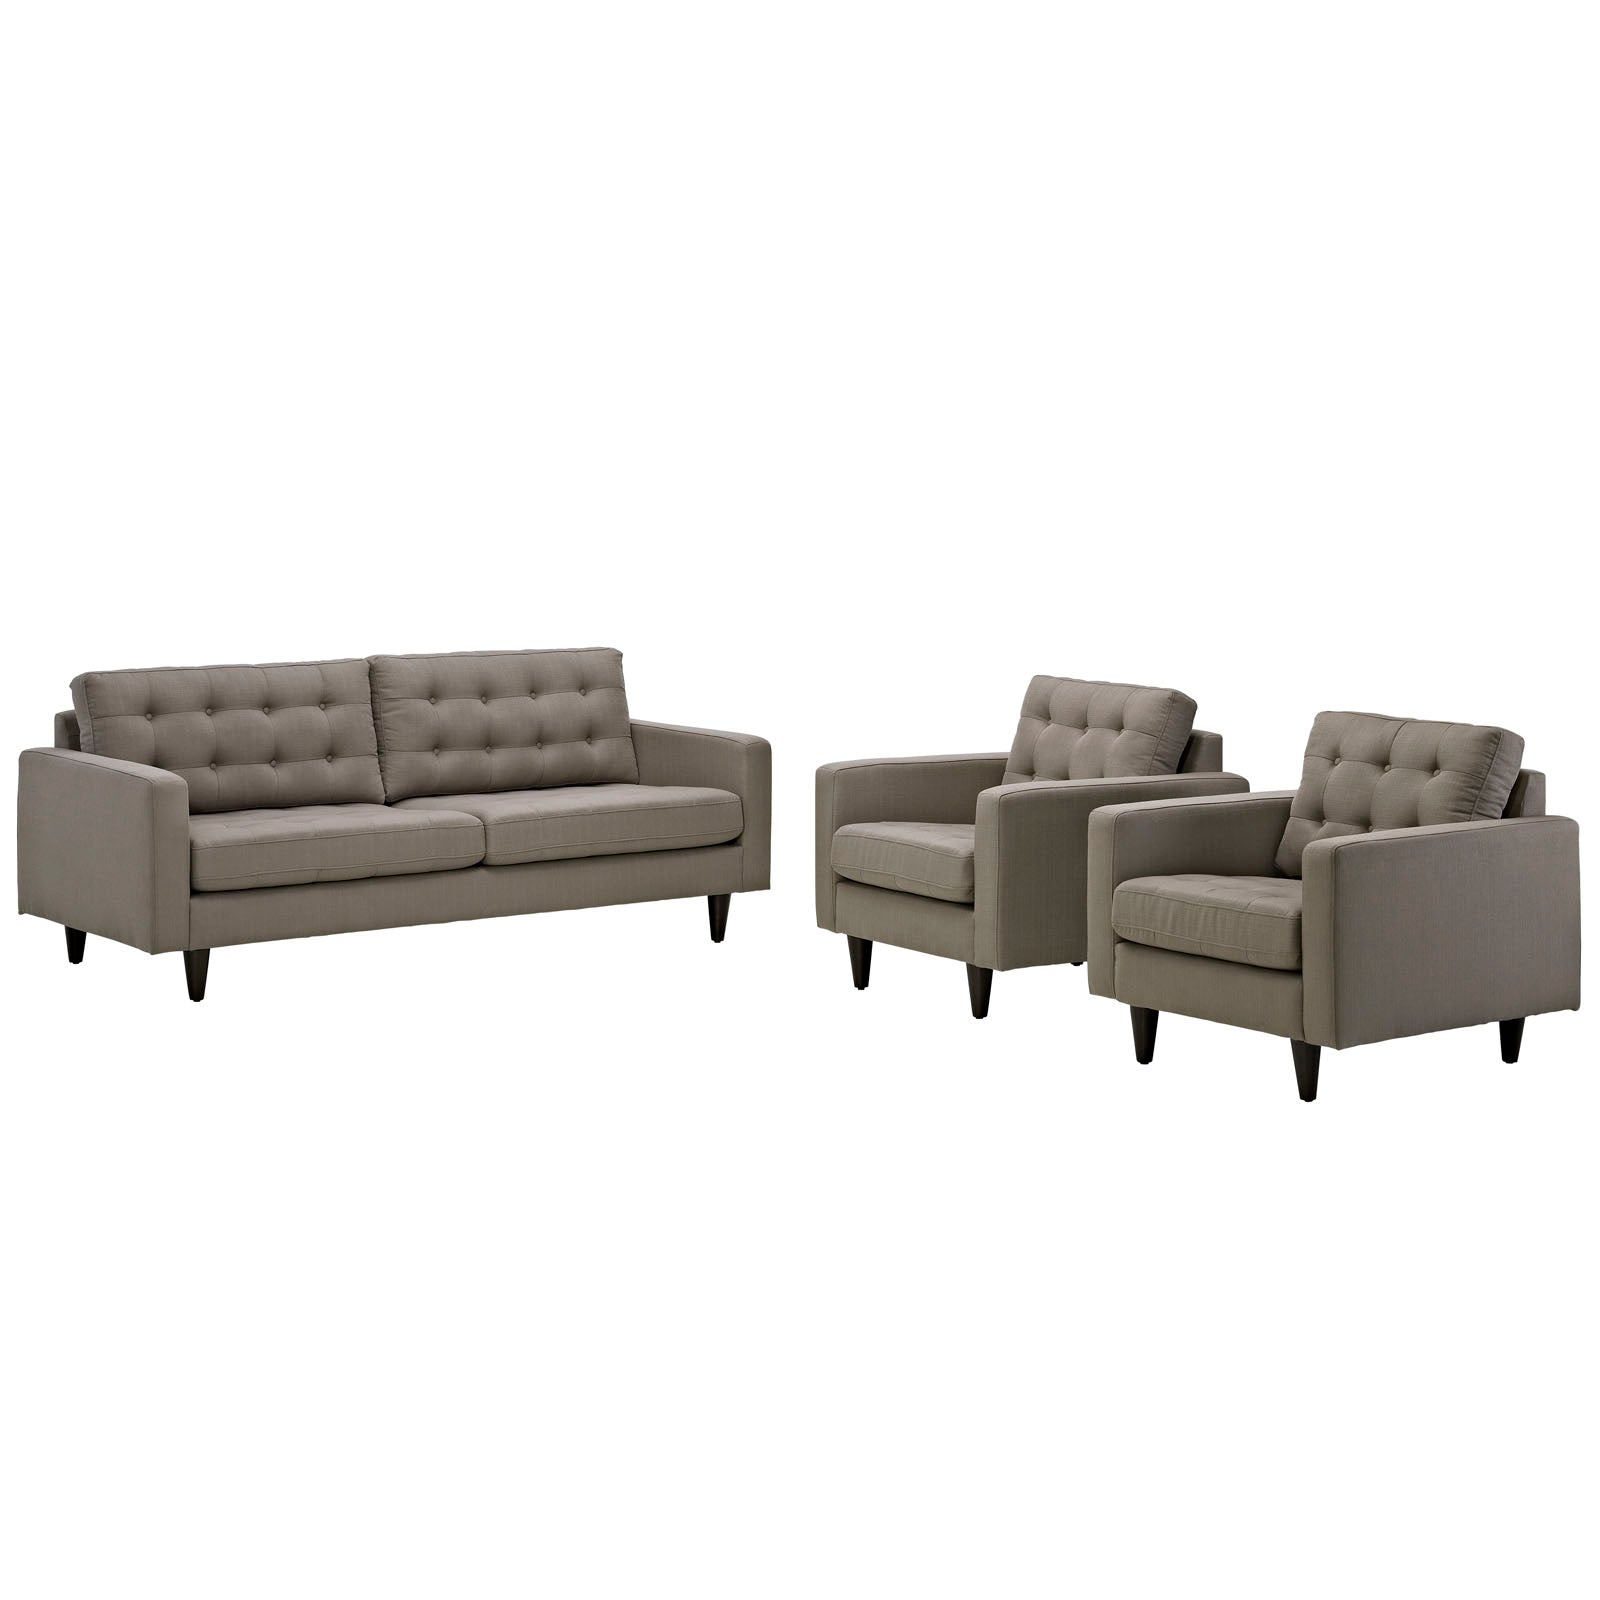 Modway Living Room Sets - Empress Sofa And Armchairs Set Of 3 Granite